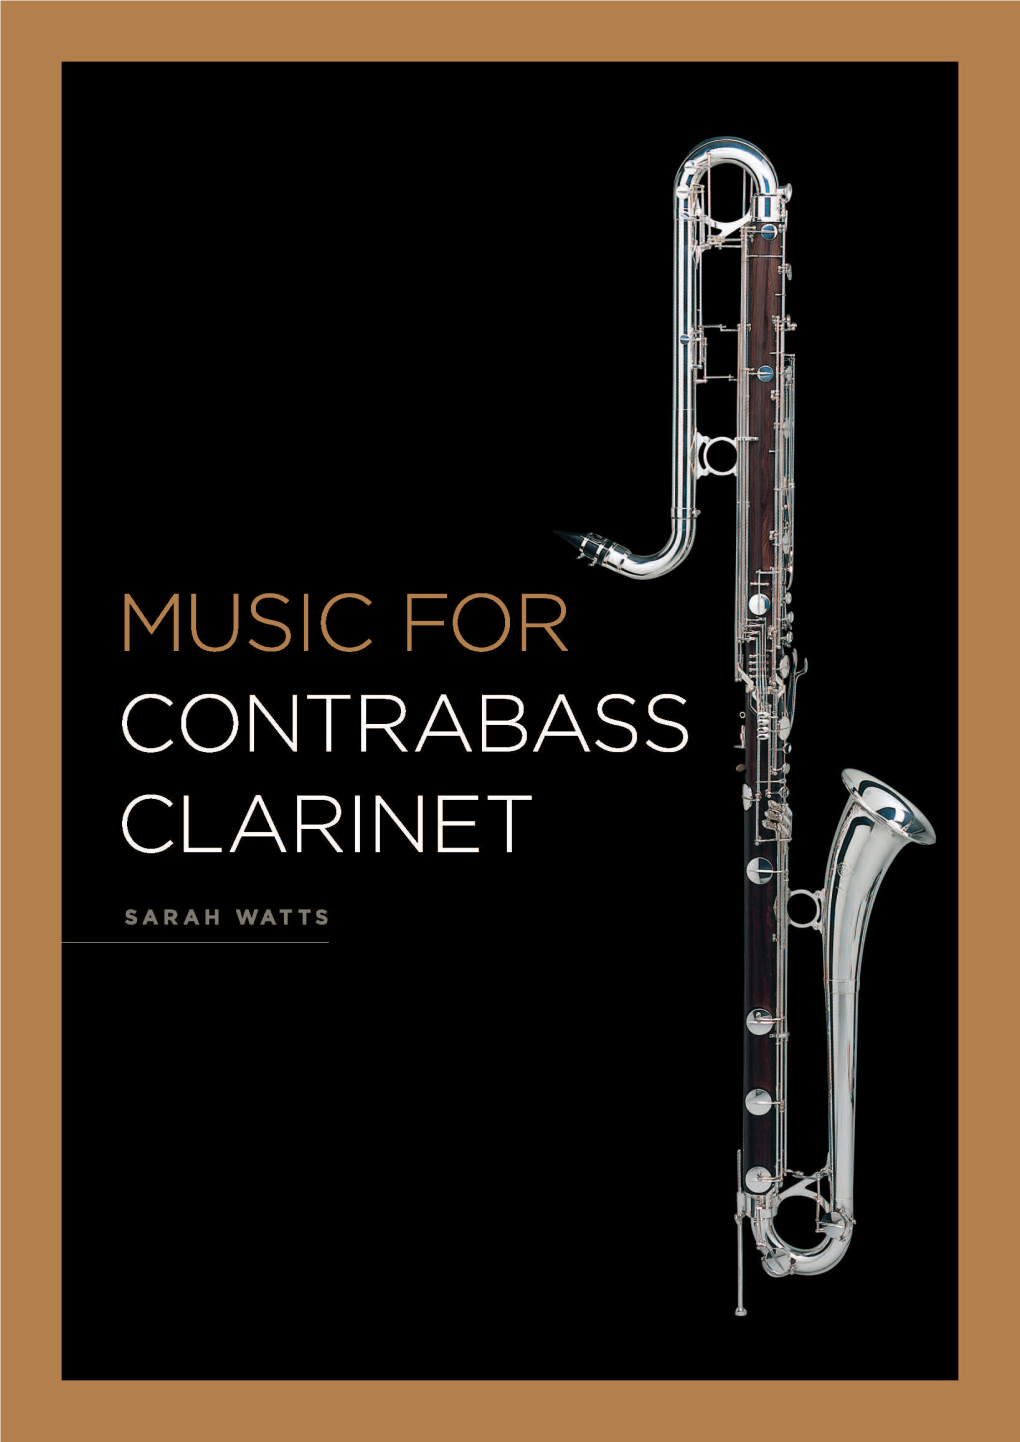 Music for Contrabass Clarinet